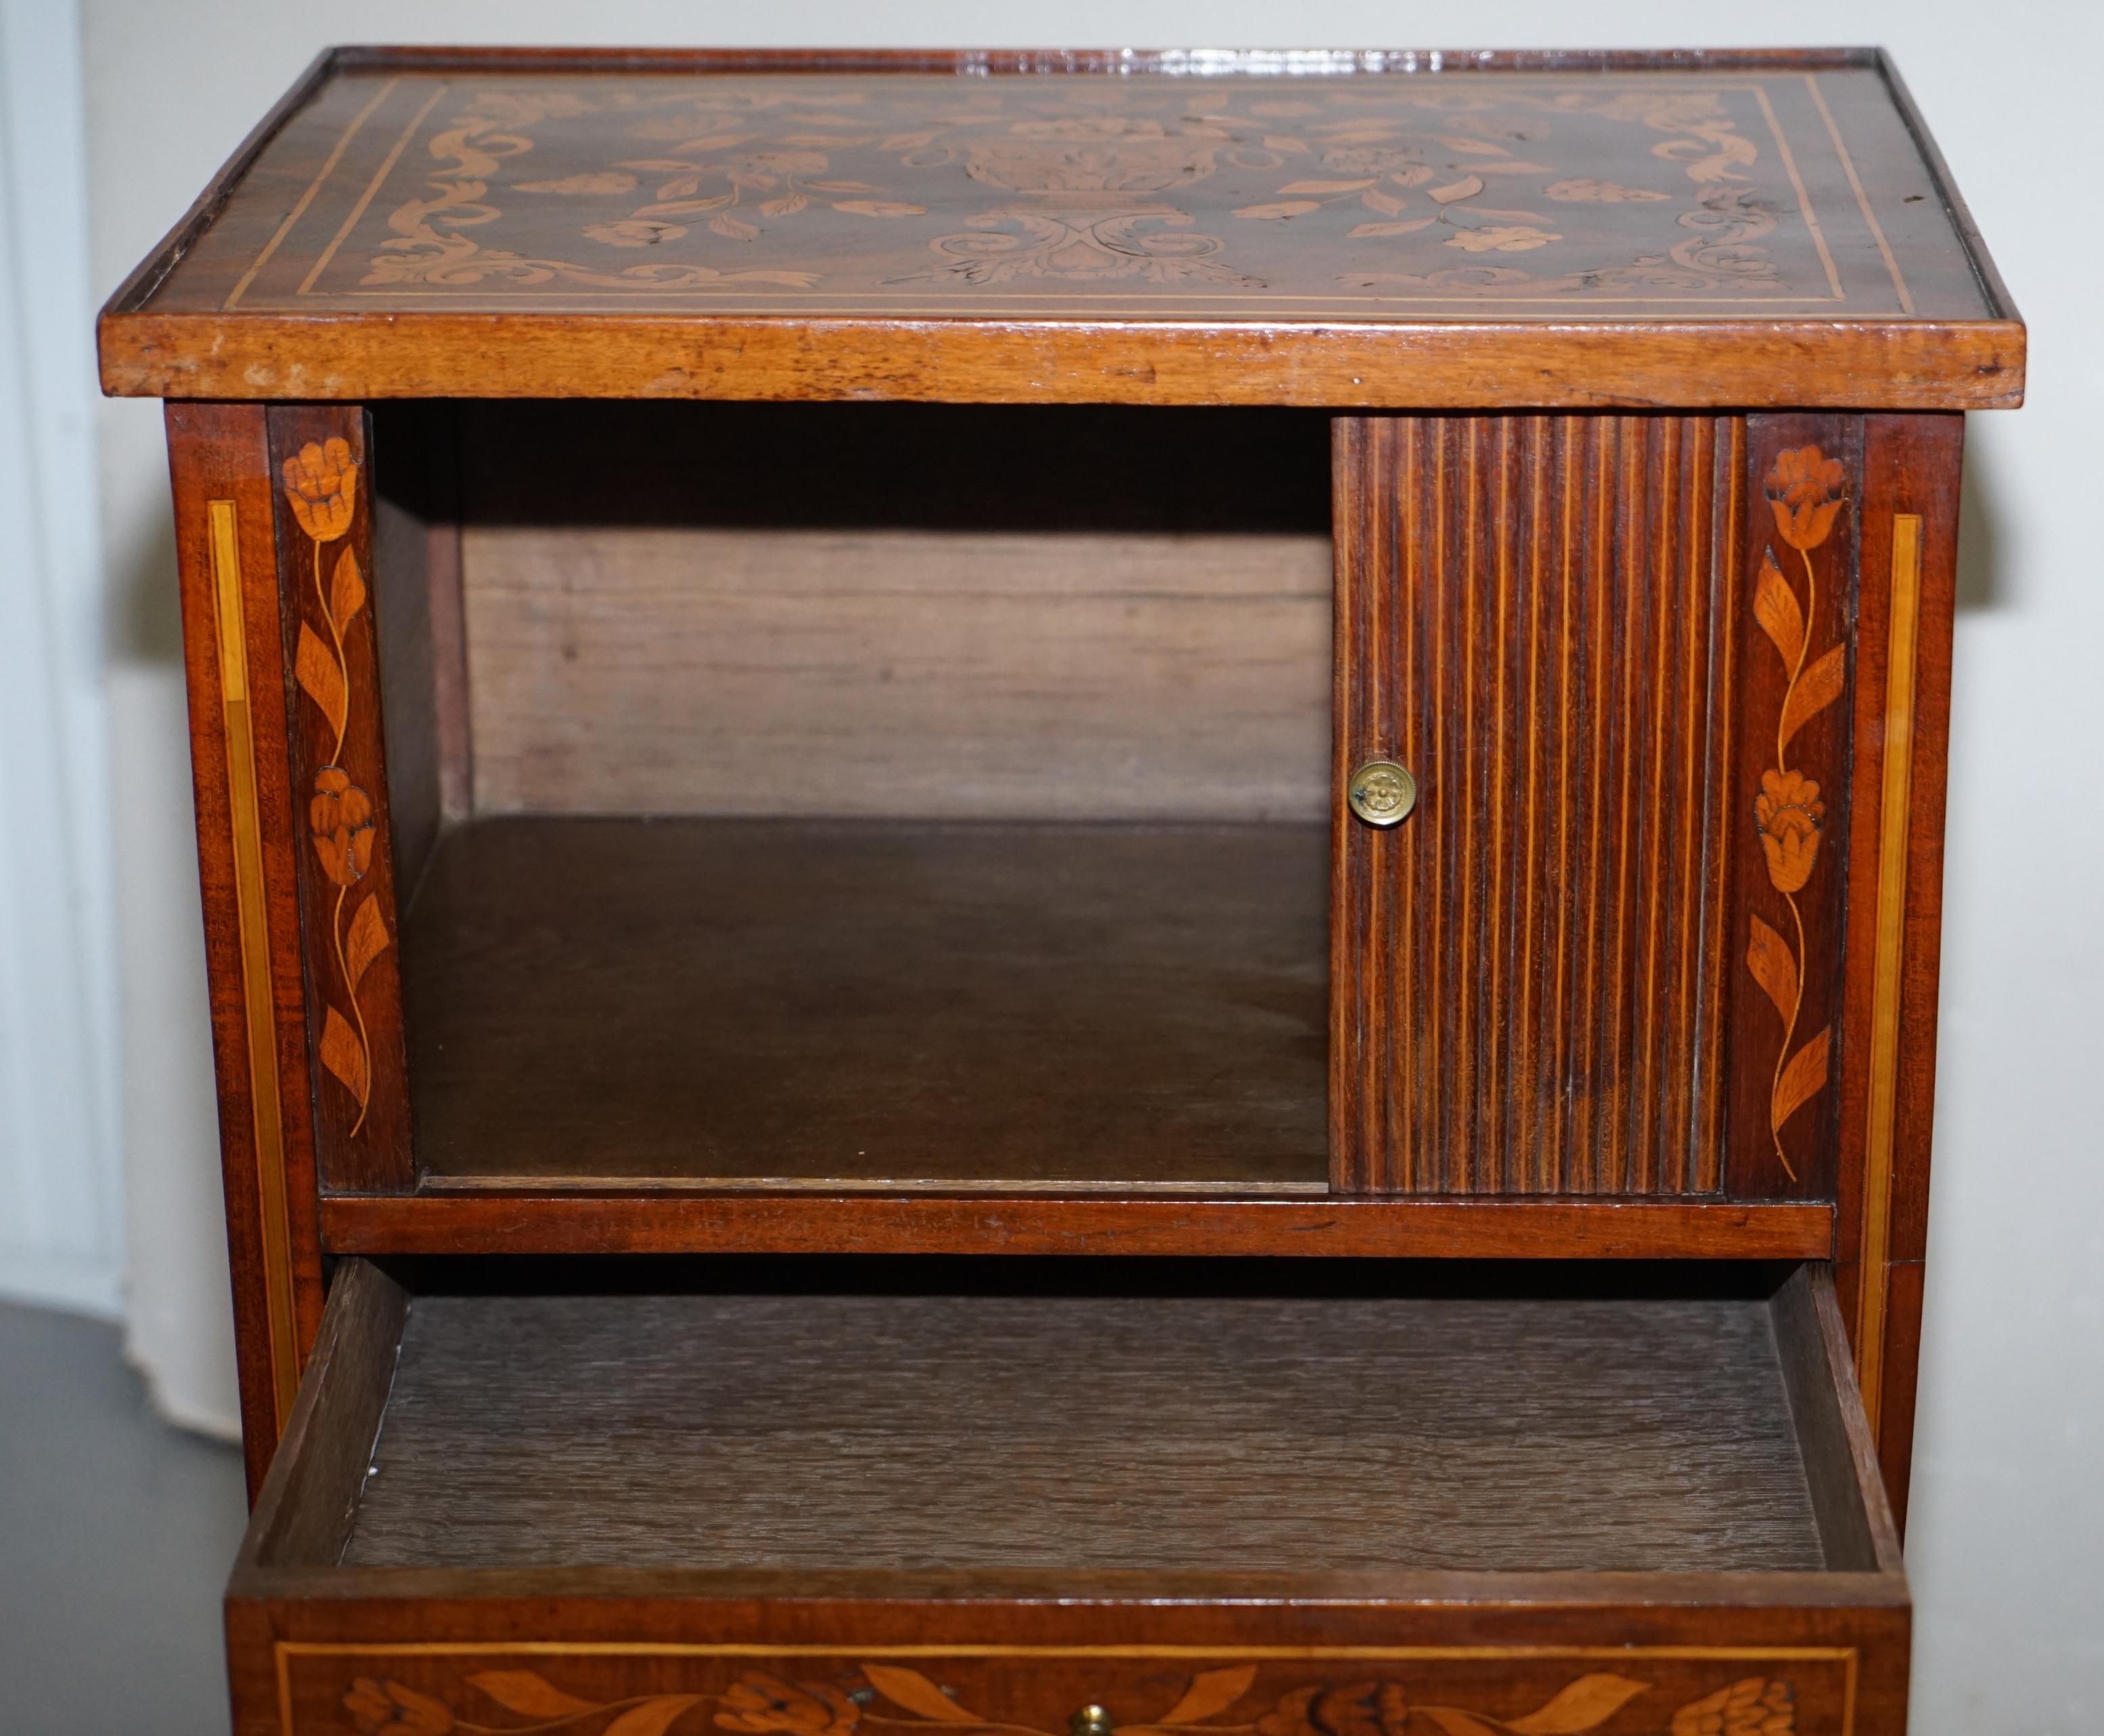 Rare 19th Century Dutch Marquetry Inlaid Side Table with Tambour Fronted Door For Sale 13